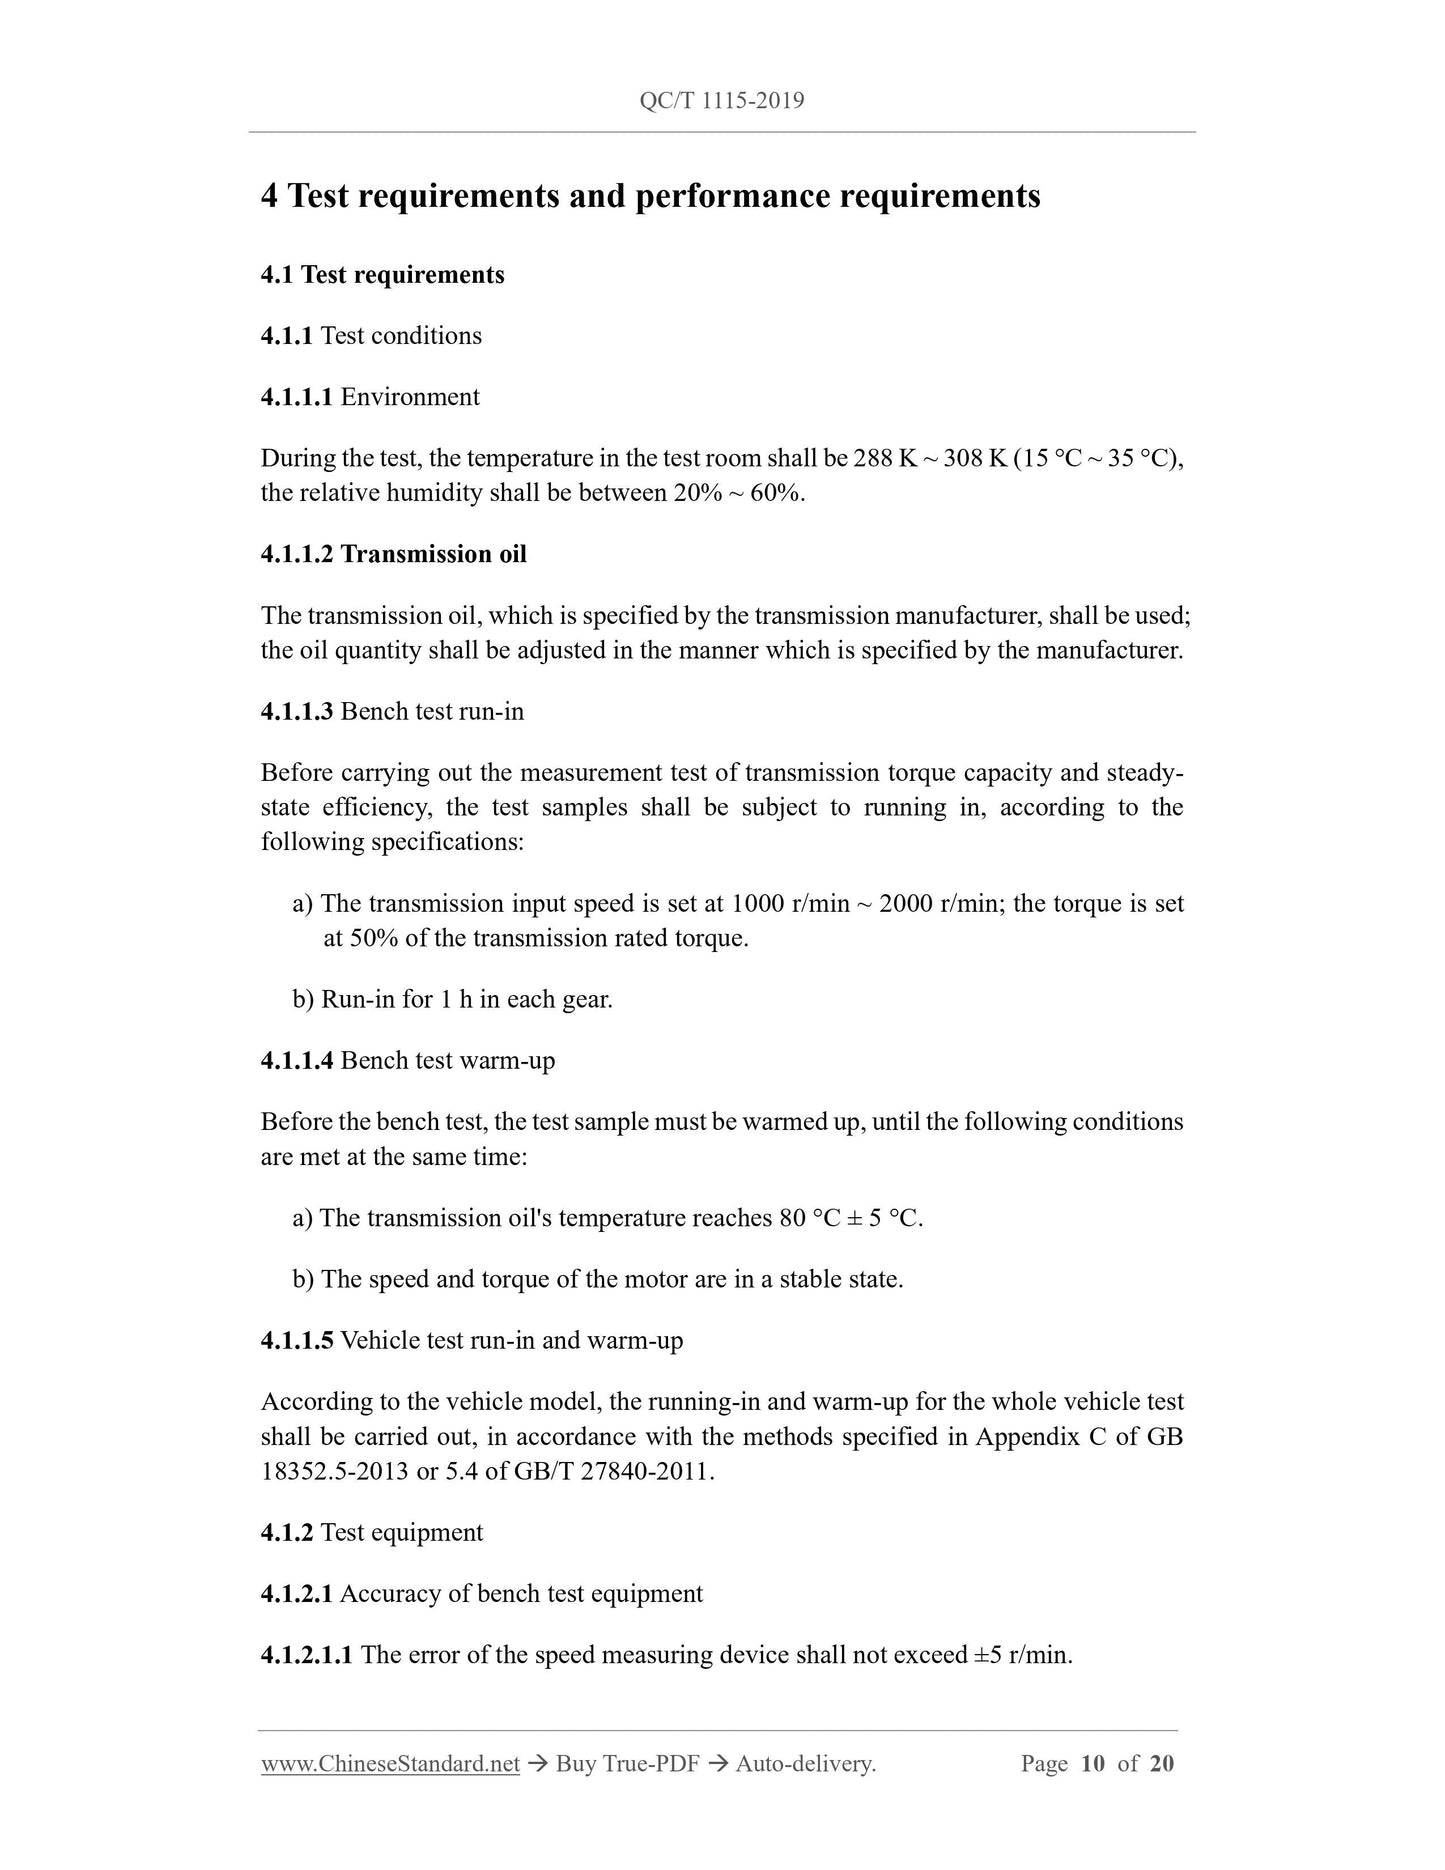 QC/T 1115-2019 Page 10